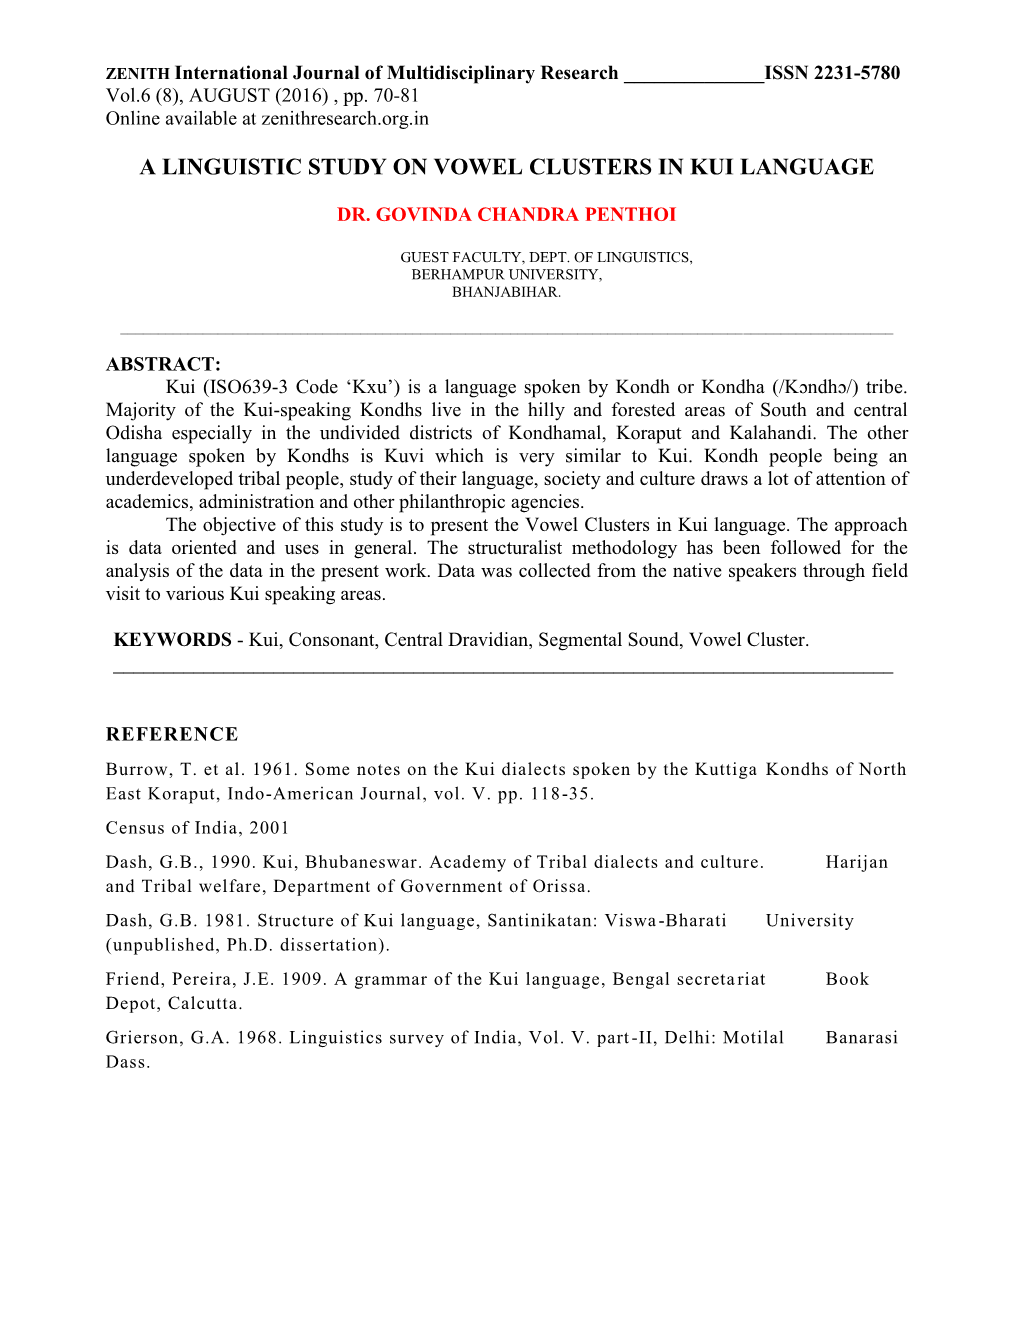 A Linguistic Study on Vowel Clusters in Kui Language